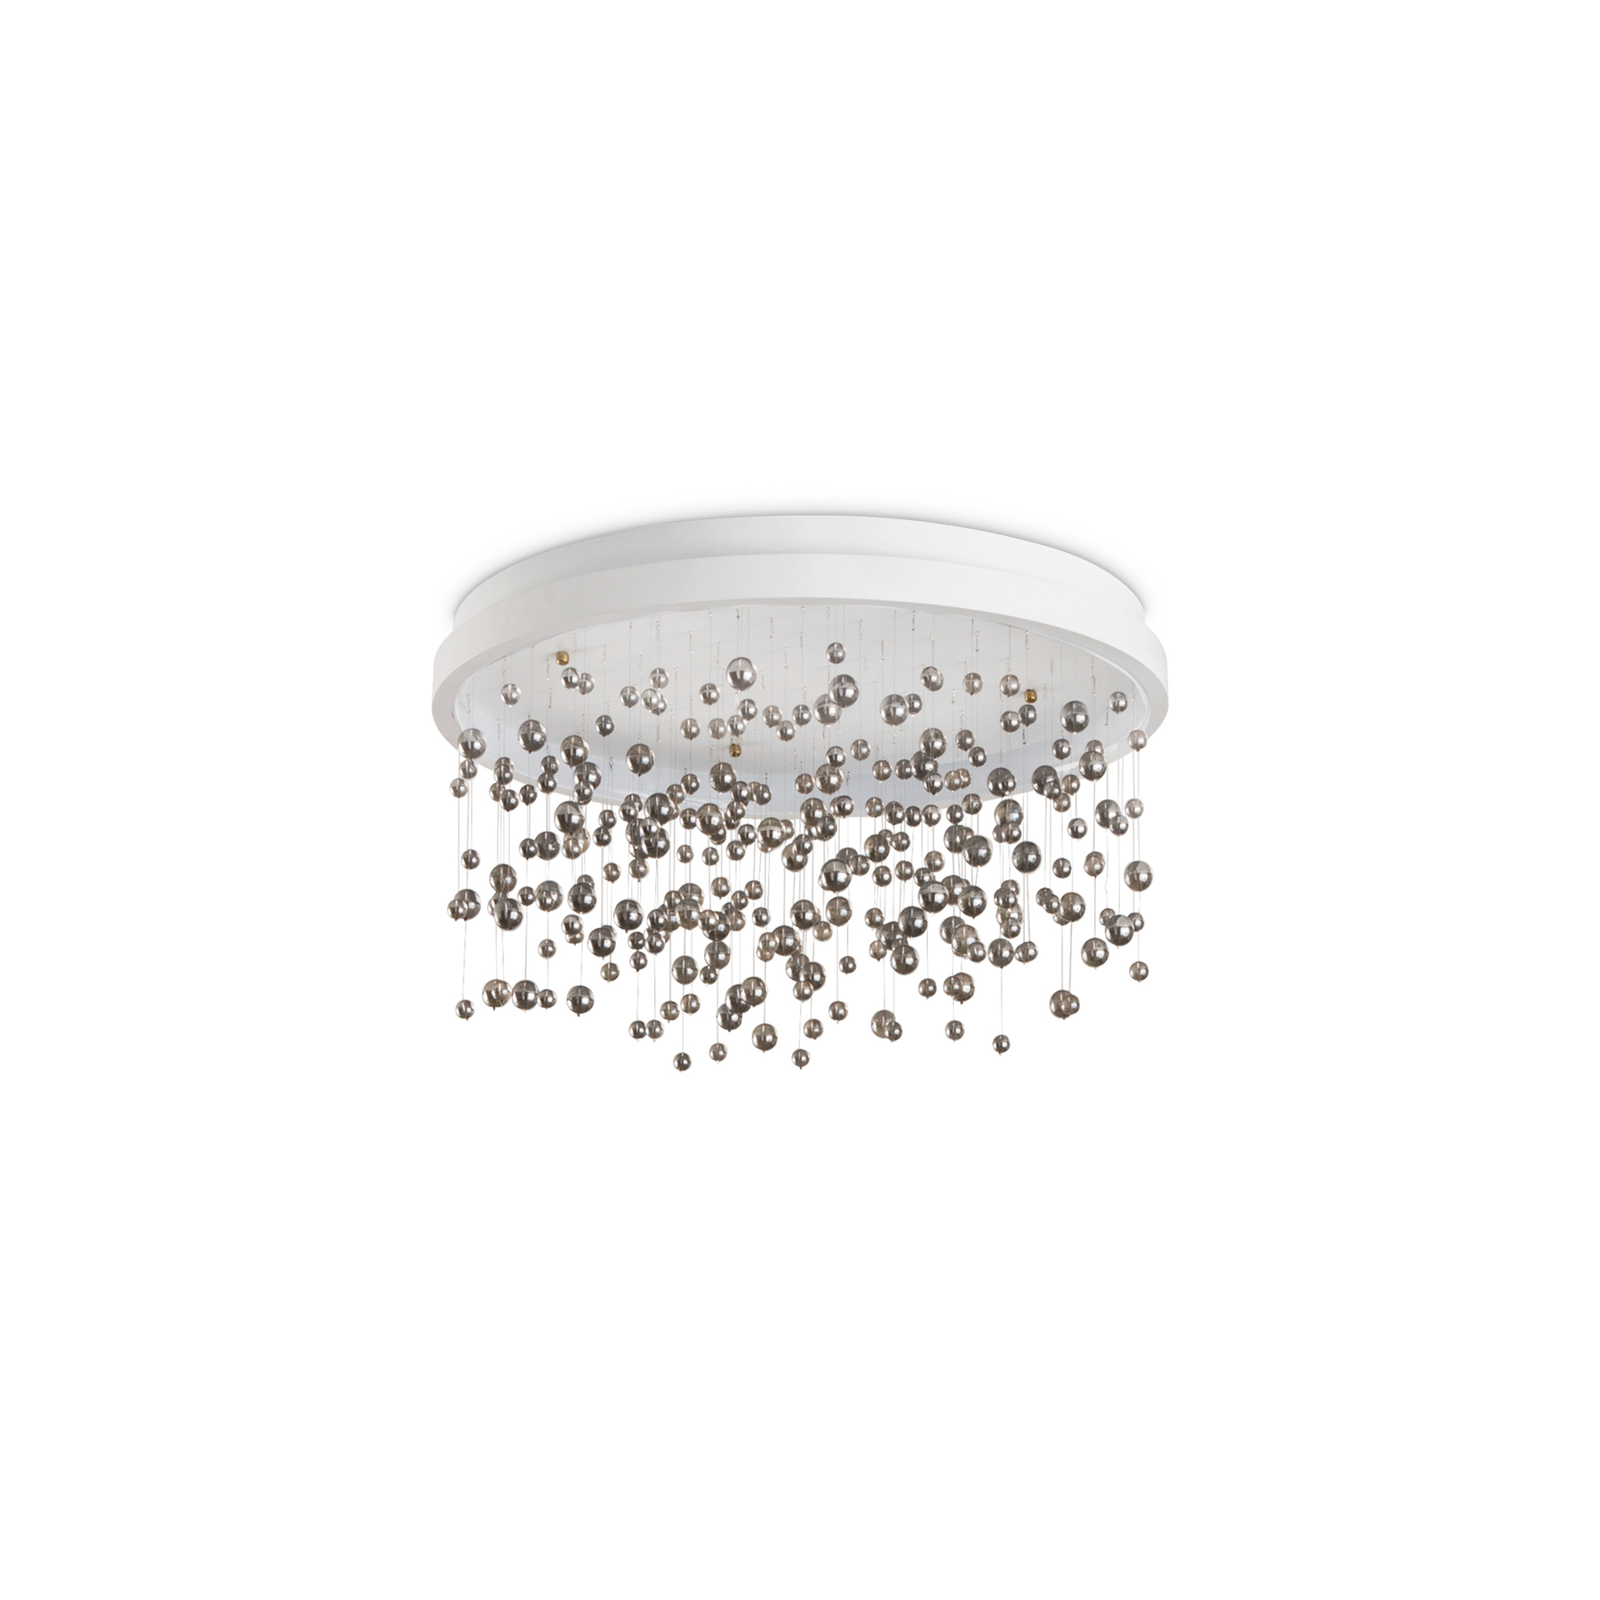 Ideal Lux LED ceiling light Armony white metal glass, Ø 50 cm